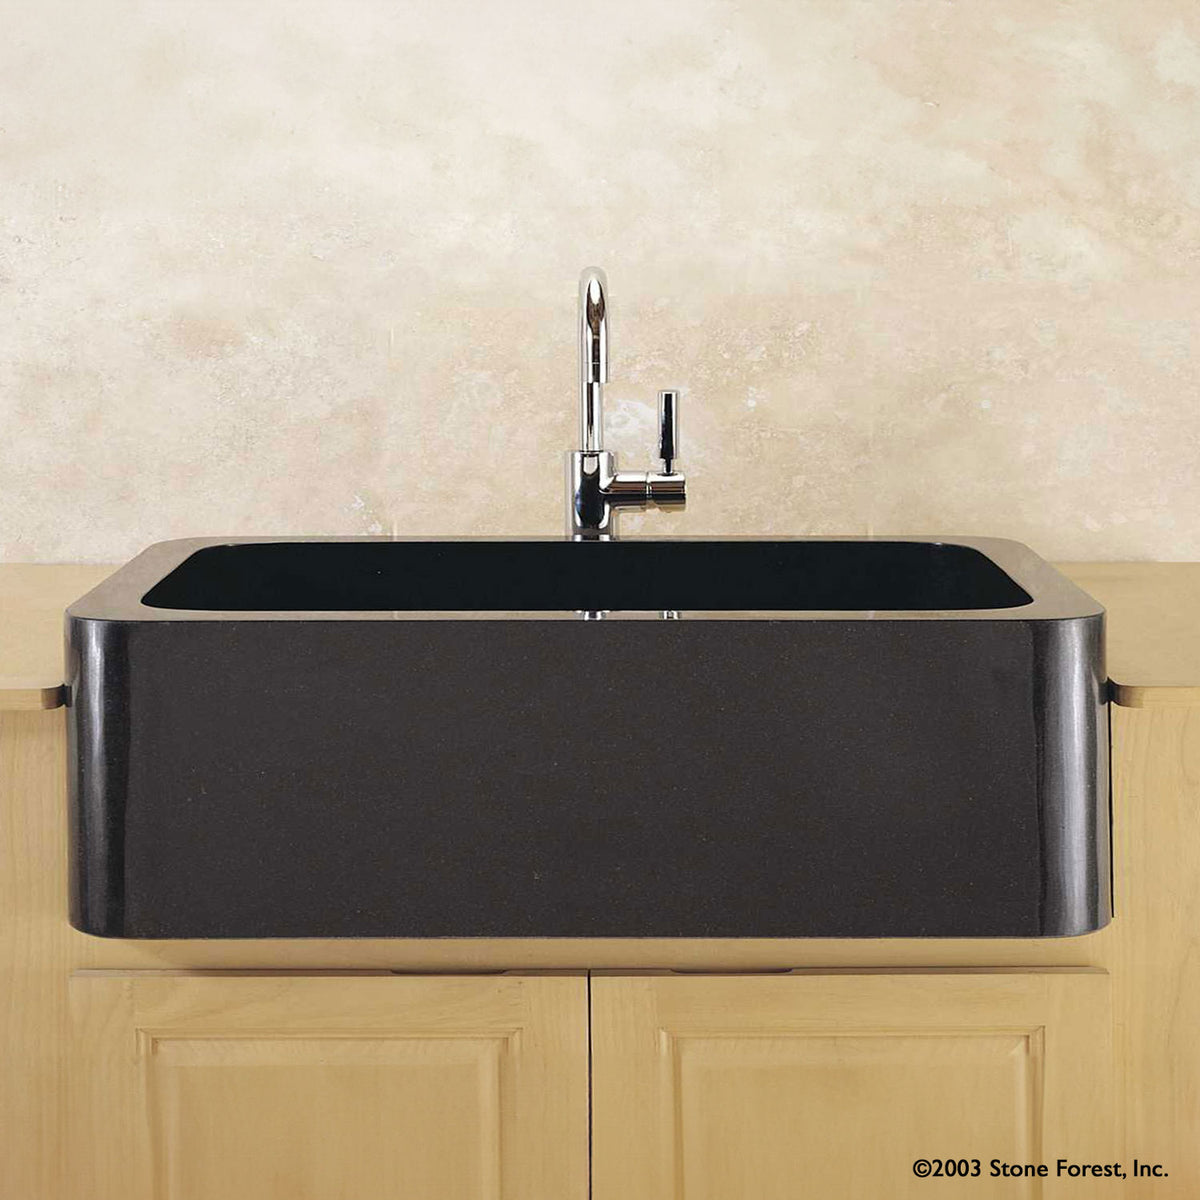 Polished Front Farmhouse Sink carved from Black Granite image 2 of 3